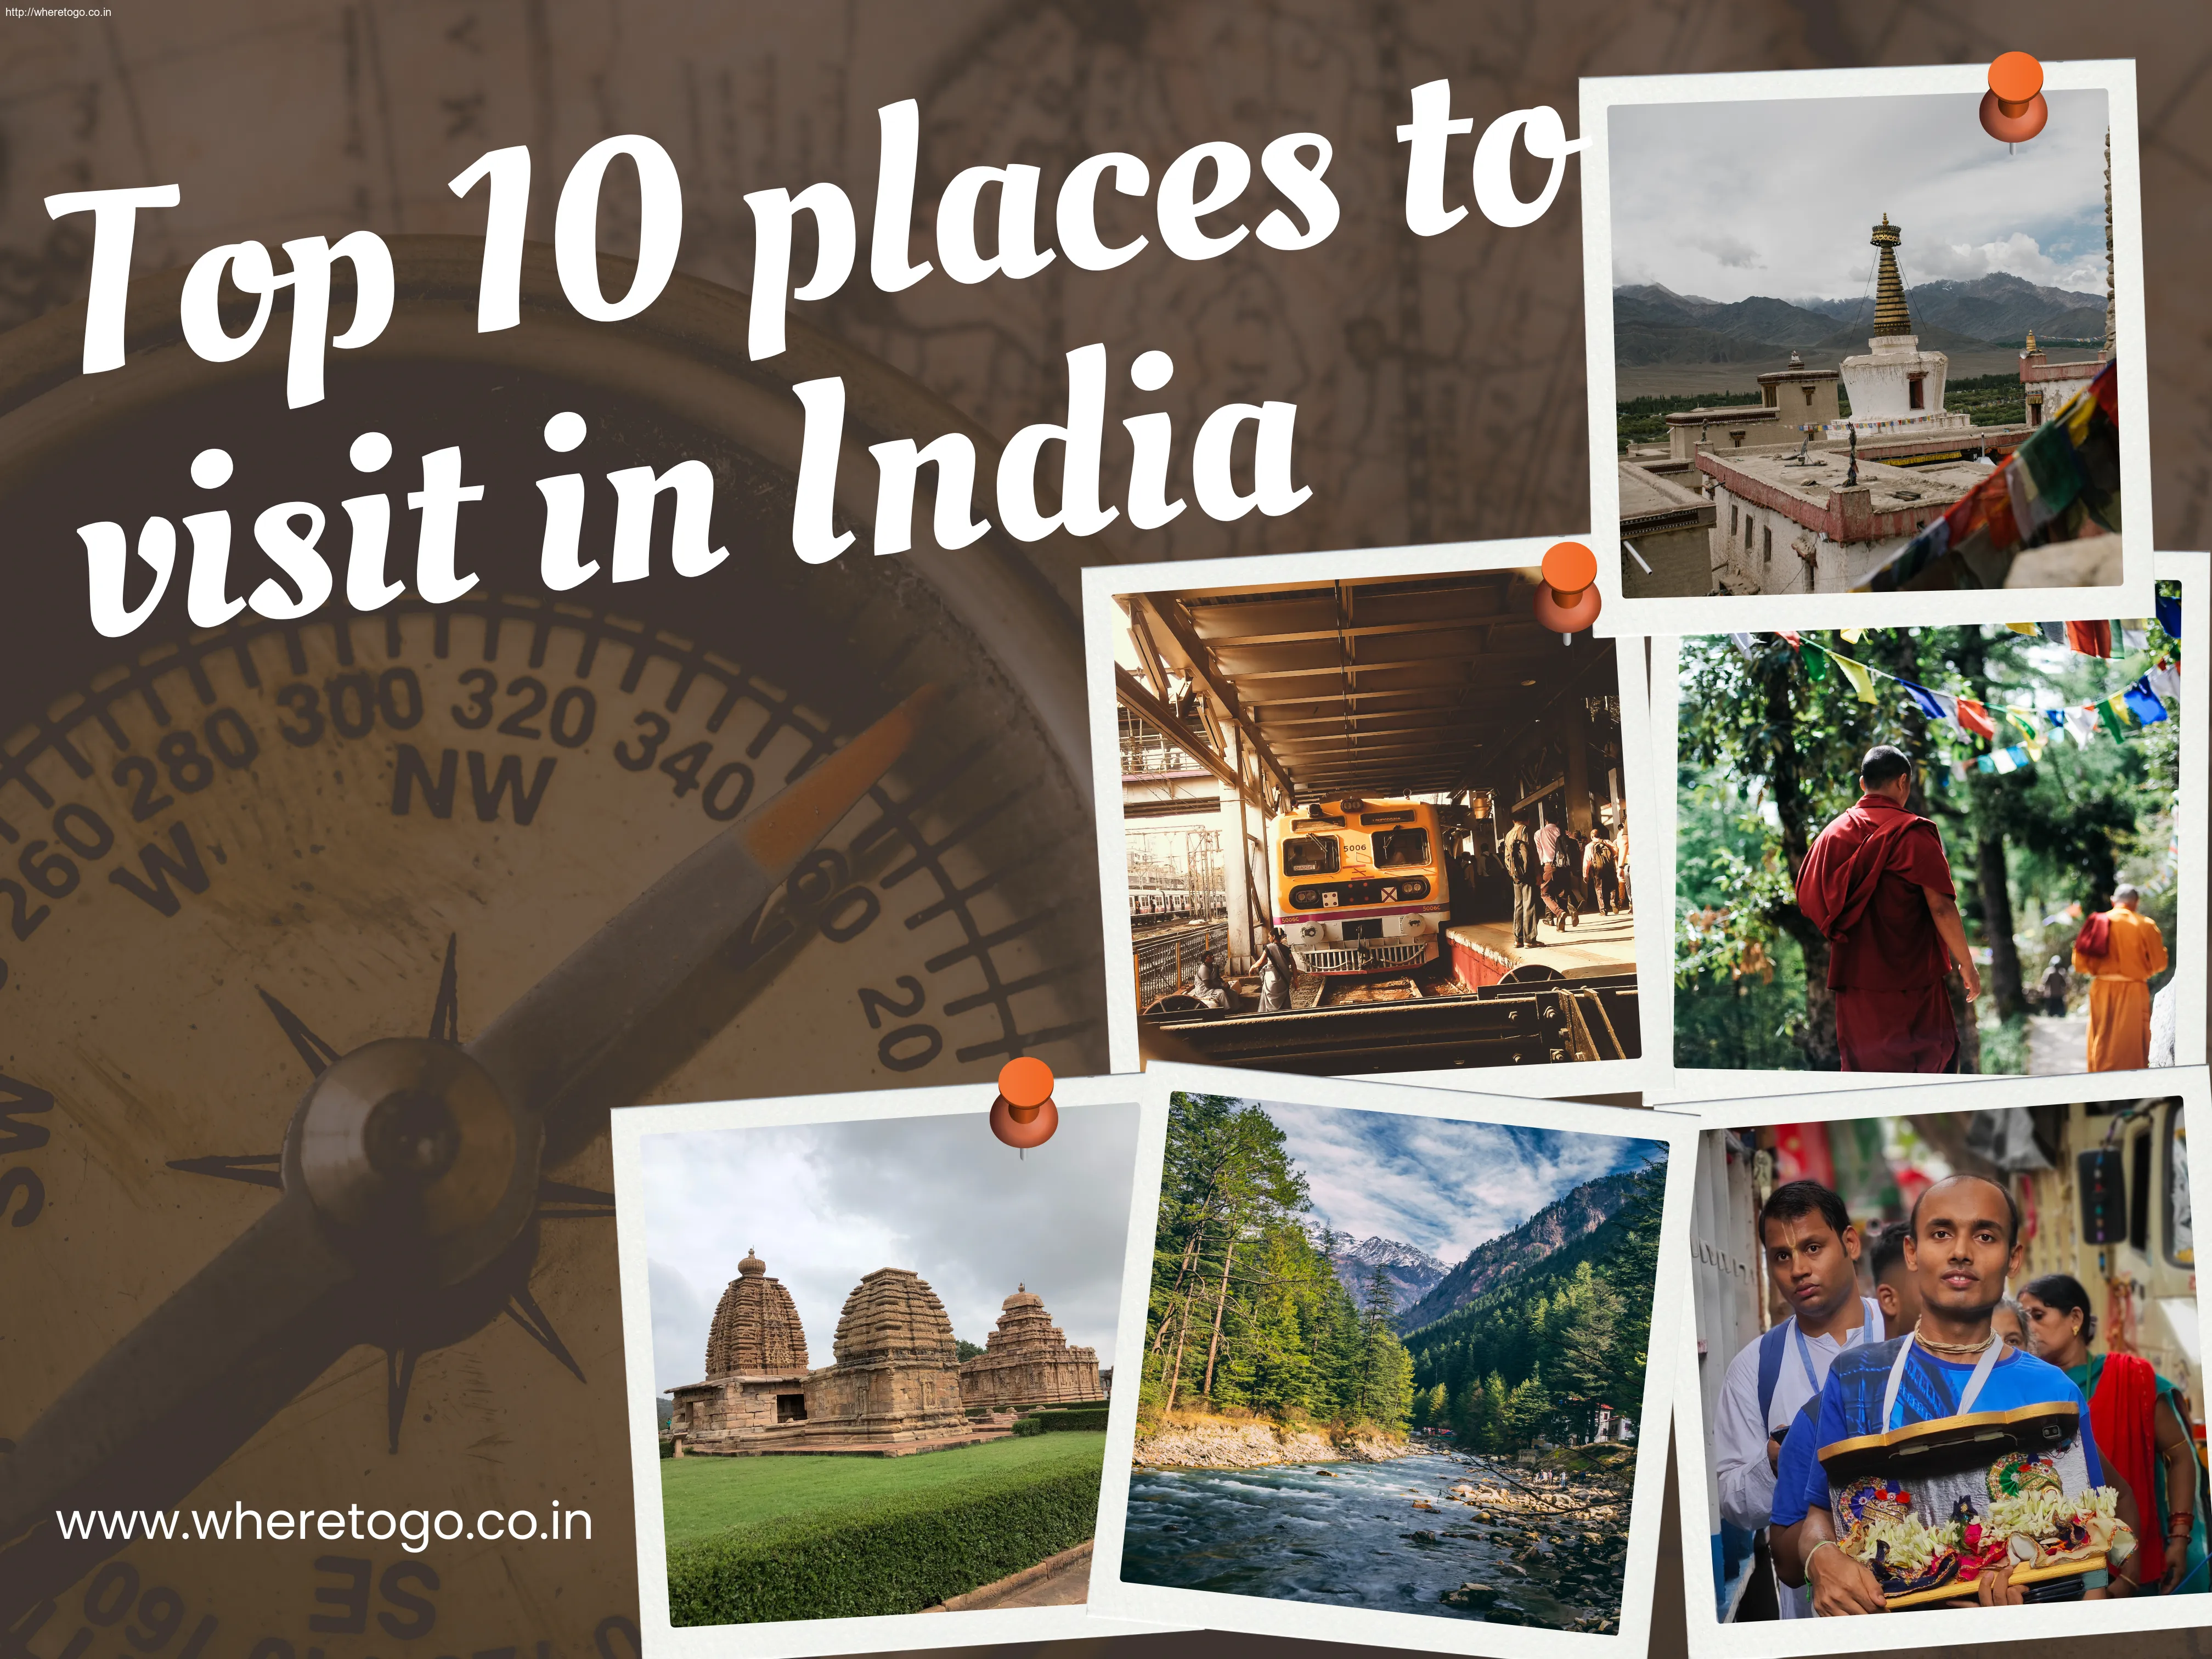 Top 10 Places to Visit in India: Culture, History, Nature